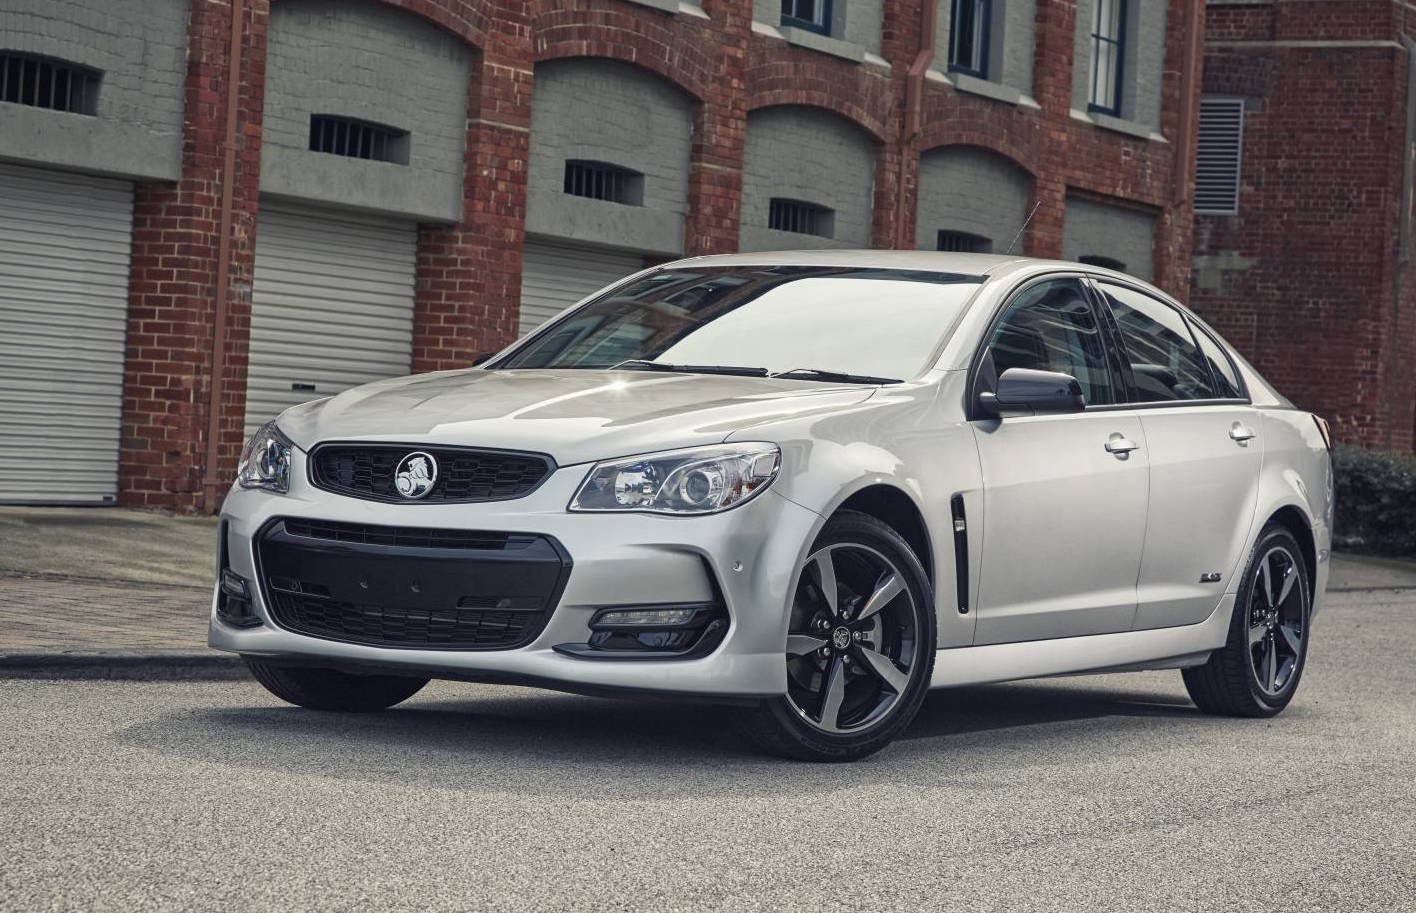 Holden Commodore SV6 production ends for manual transmission